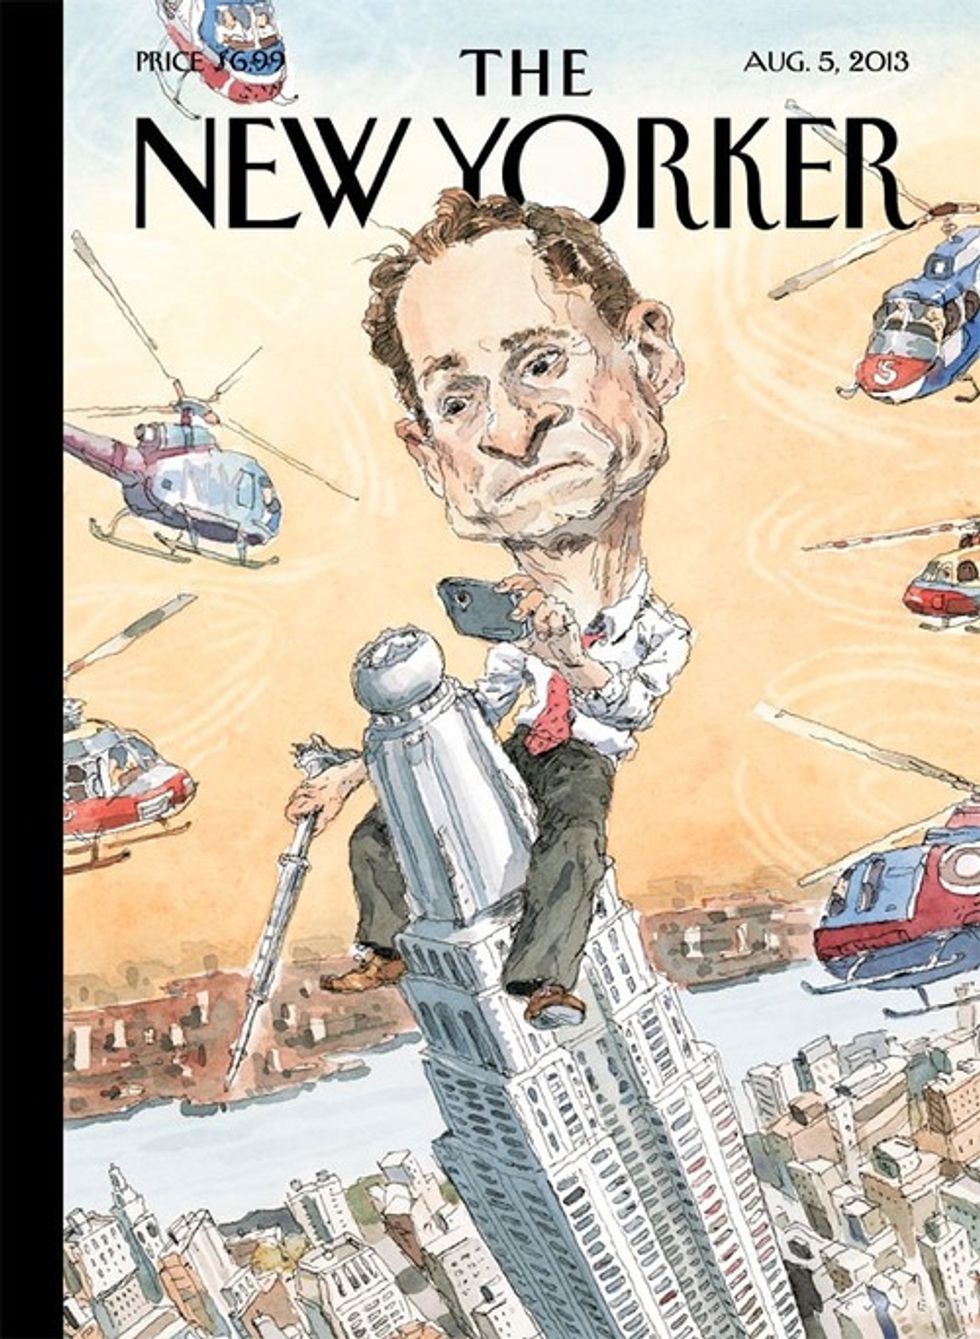 But What Will K-Lo's Reaction Be To This New Yorker Cover Of Anthony Weiner's Danger Dong?